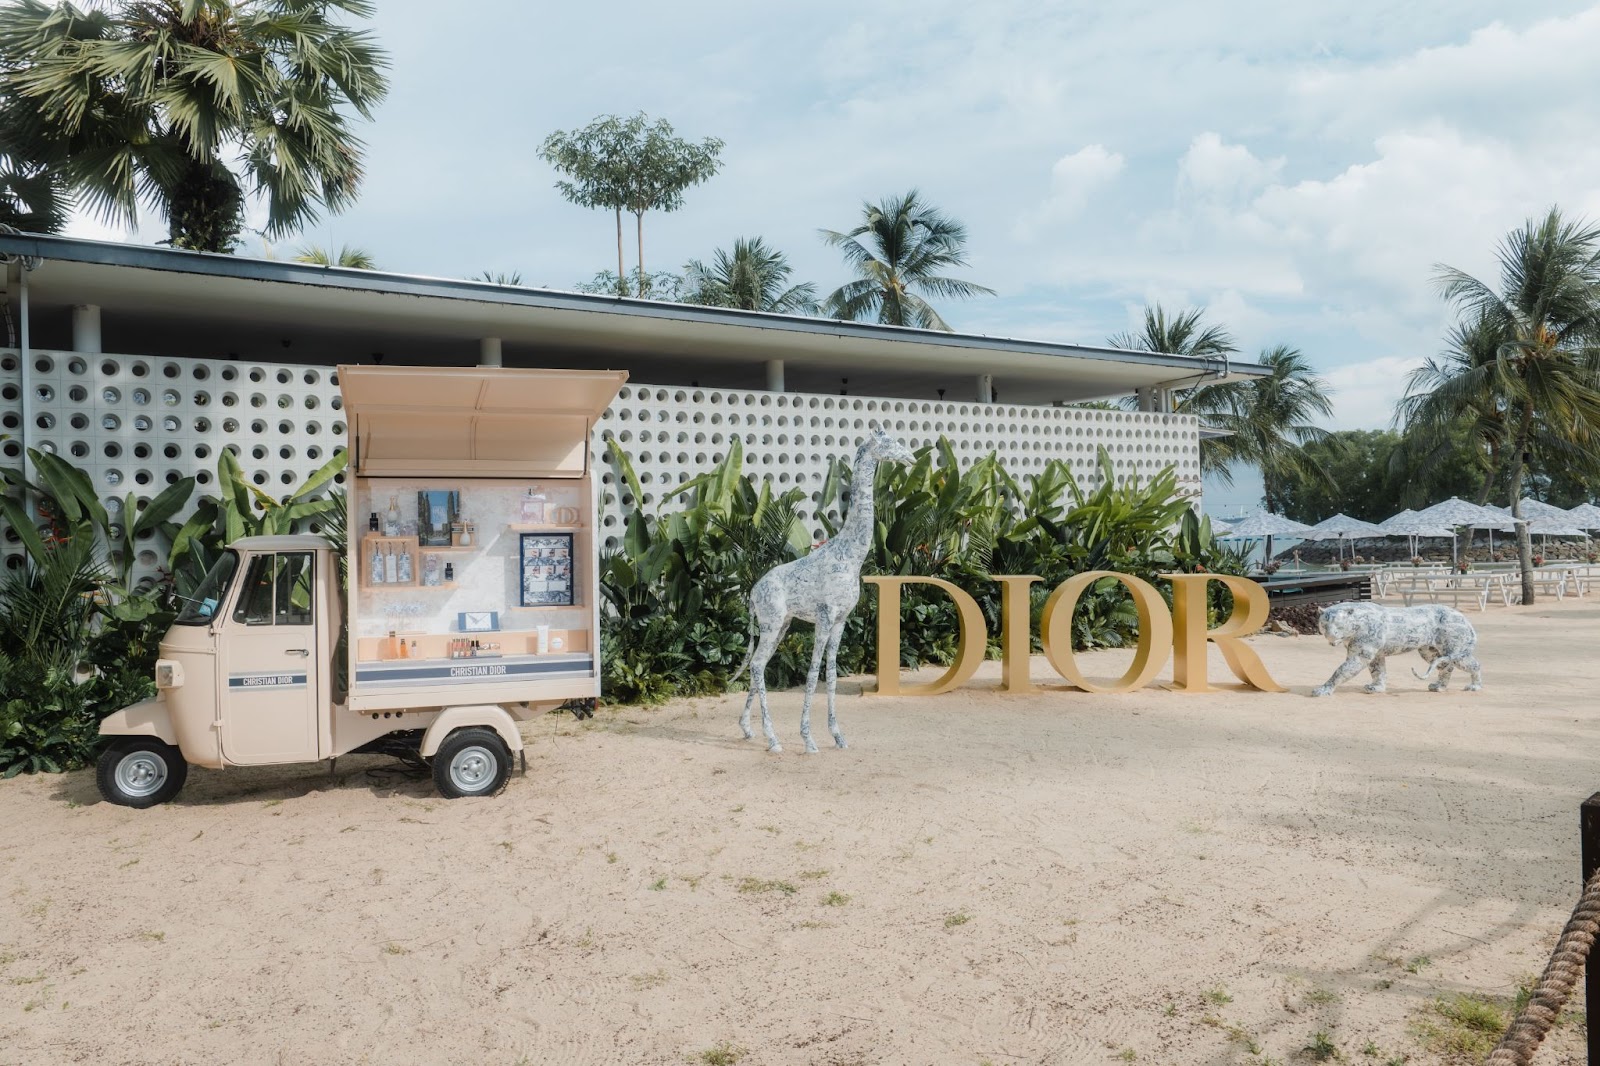 The Tanjong Beach Club, Singapore entrance done up for the Dior Dioriviera event with animal sculptures and a Dior auto-rickshaw.